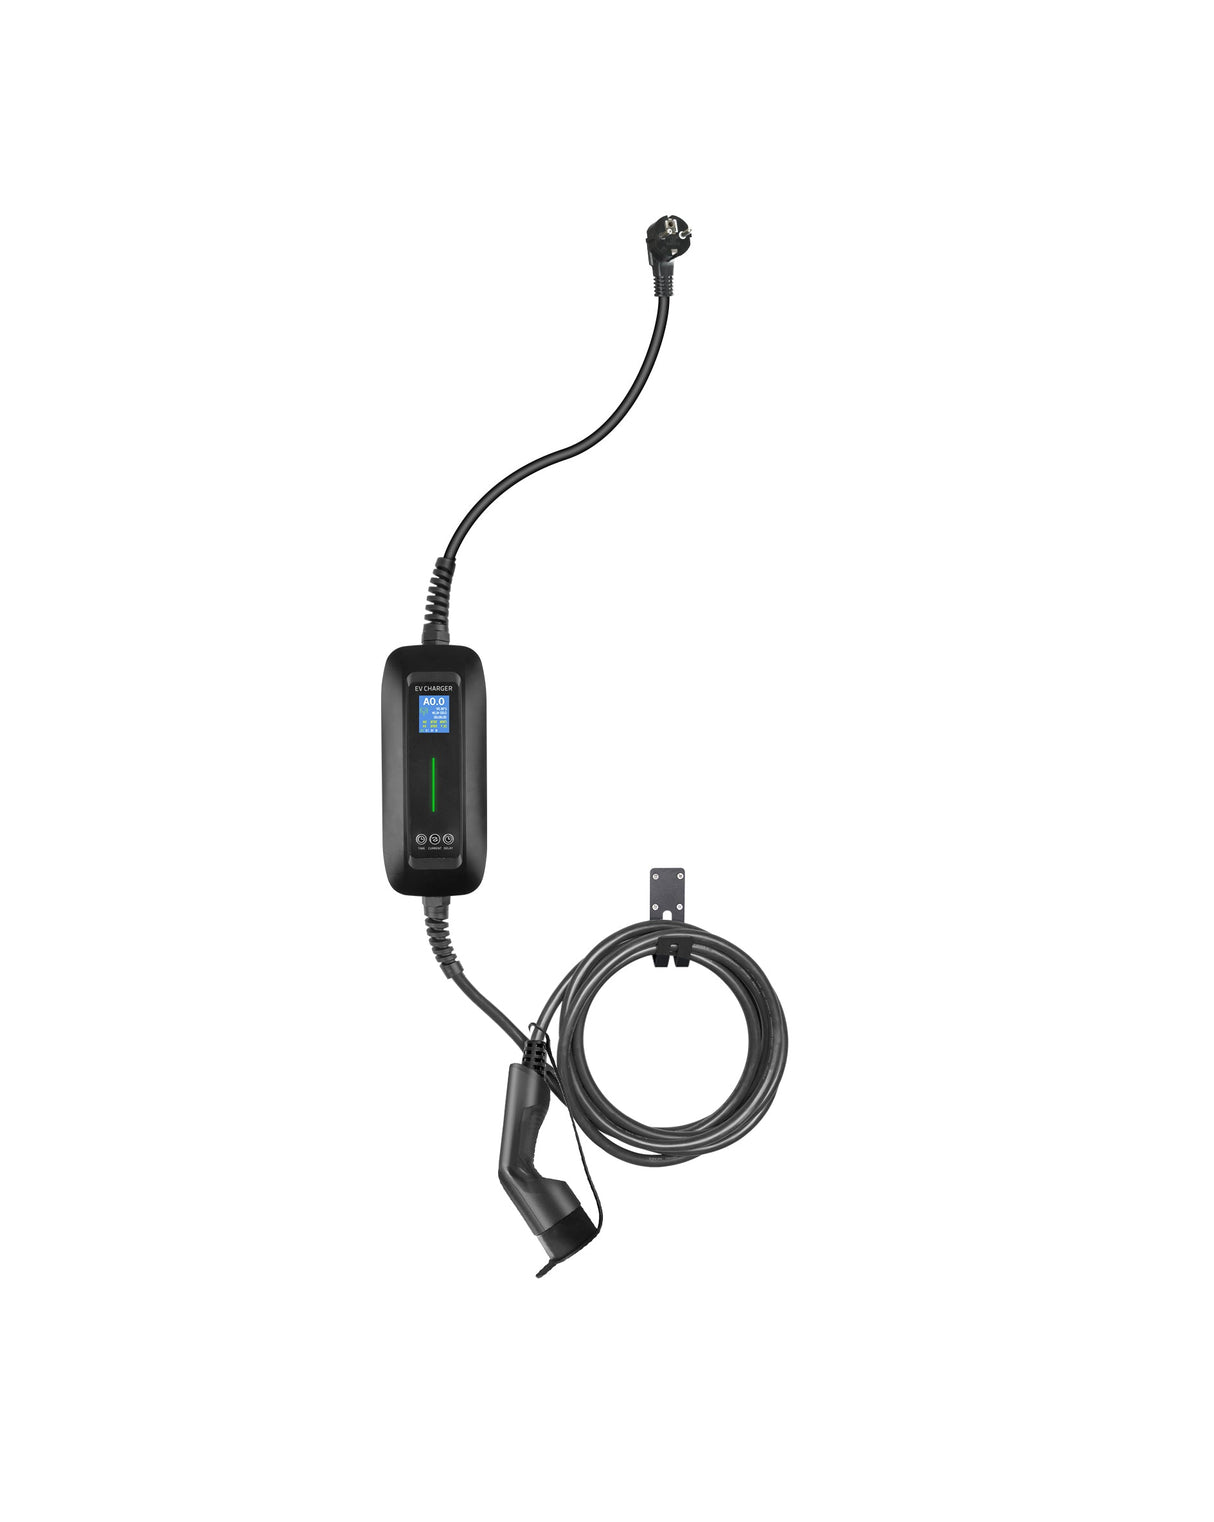 Mobile Charger Byton M-Byte - LCD Black Type 2 to Schuko - Delayed charging and Memory function